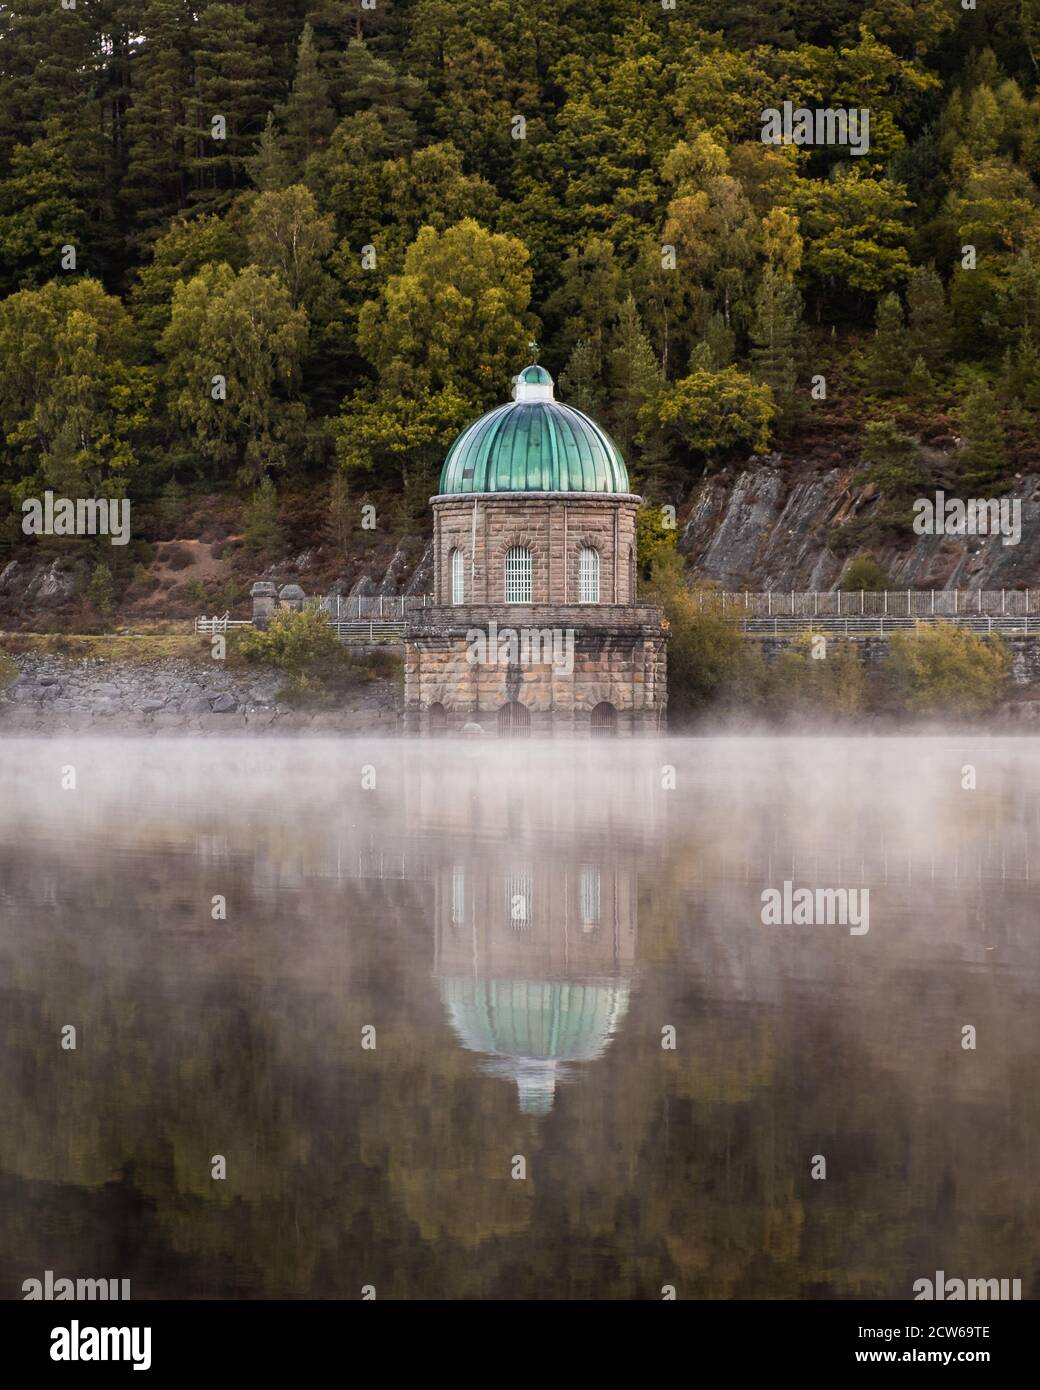 The Elan Valley Reservoirs are a chain of man-made lakes created from damming the Elan and Claerwen rivers within the Elan Valley in Mid Wales. Stock Photo